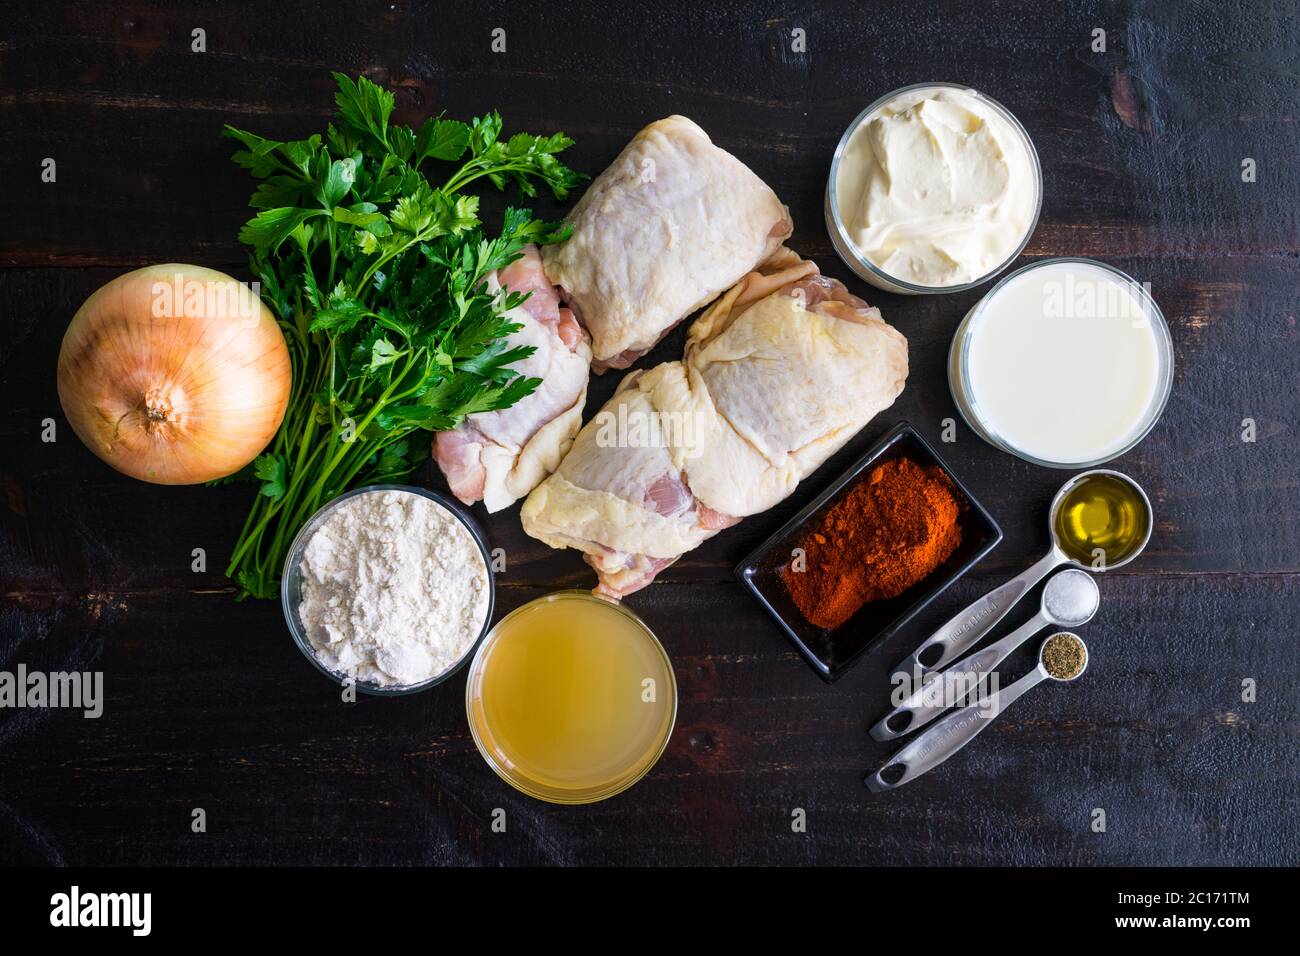 Hungarian Chicken Paprikash Ingredients: Chicken thighs, paprika, sour cream, and other ingredients for a traditional Hungarian dish Stock Photo